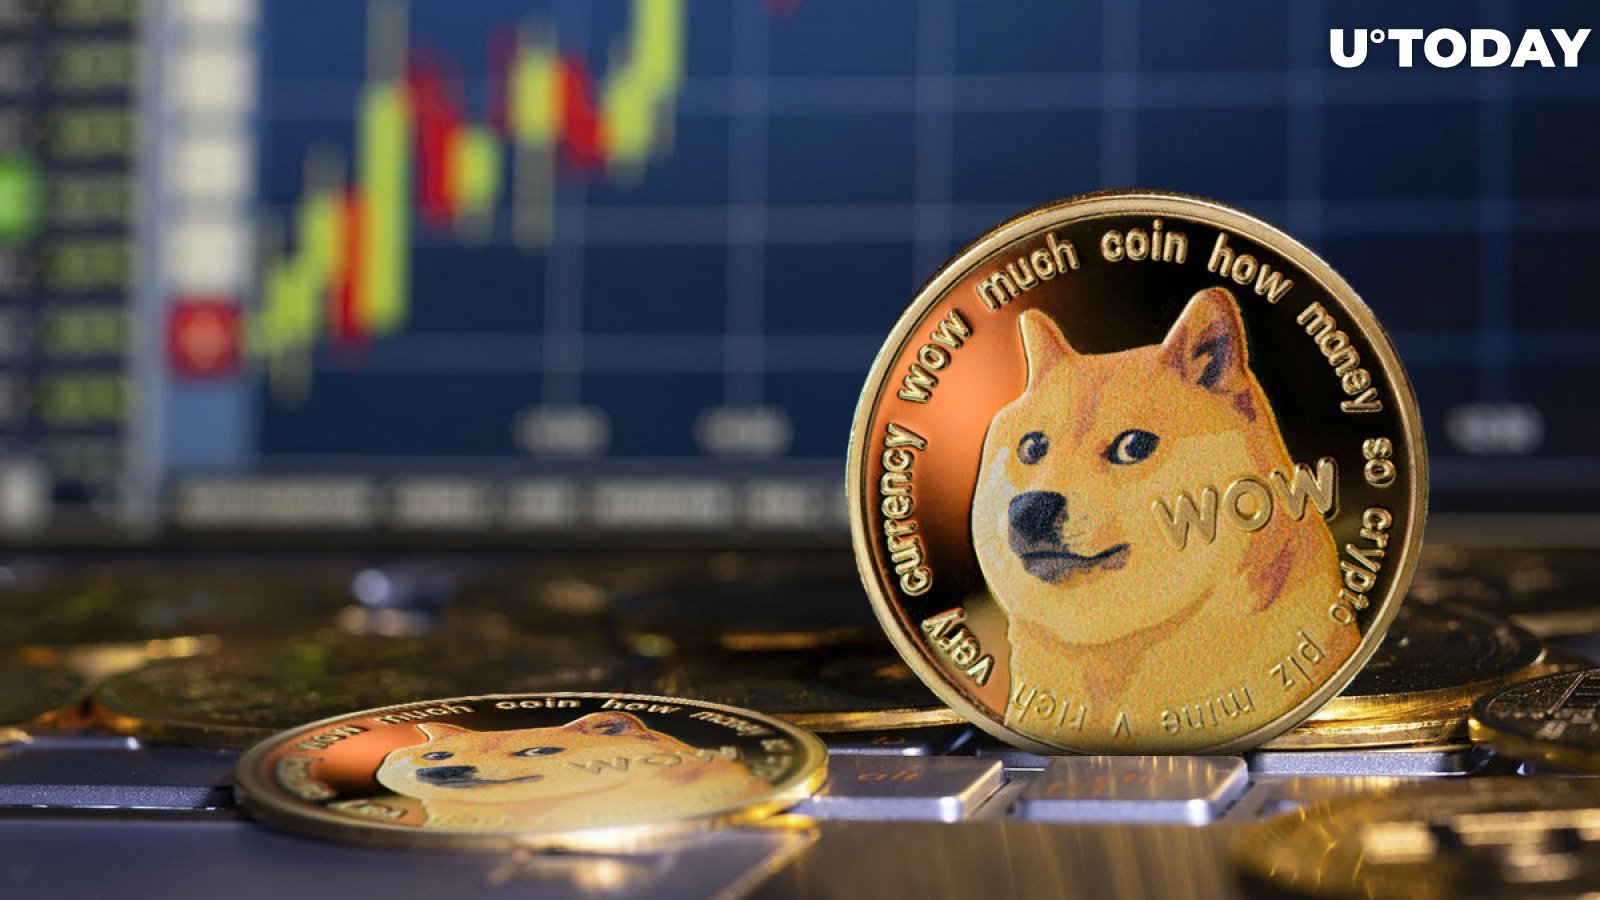 118.4M DOGE Sent to Robinhood, Community Makes Wildest Guess